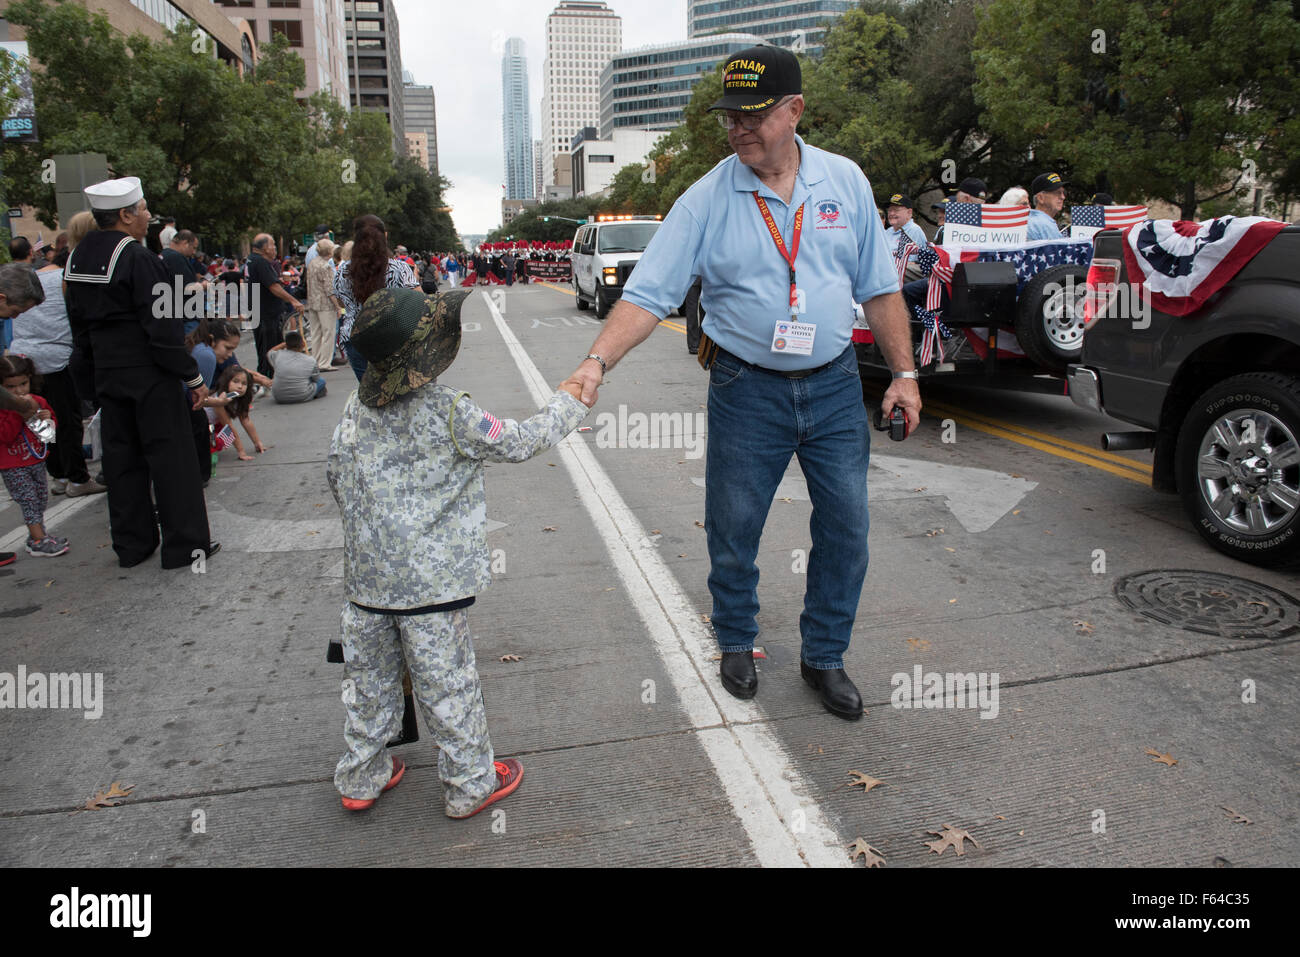 Austin, Texas USA November 11, 2015: Vietnam veteran Ken Steffek (r) greets young soldier Jonah Rodriguez during the Veteran's Day parade up Congress Avenue and ceremony at the Texas Capitol. Several thousand Texans lined Congress Avenue to witness military heroes, marching bands and floats in the annual parade. Credit:  Bob Daemmrich/Alamy Live News Stock Photo